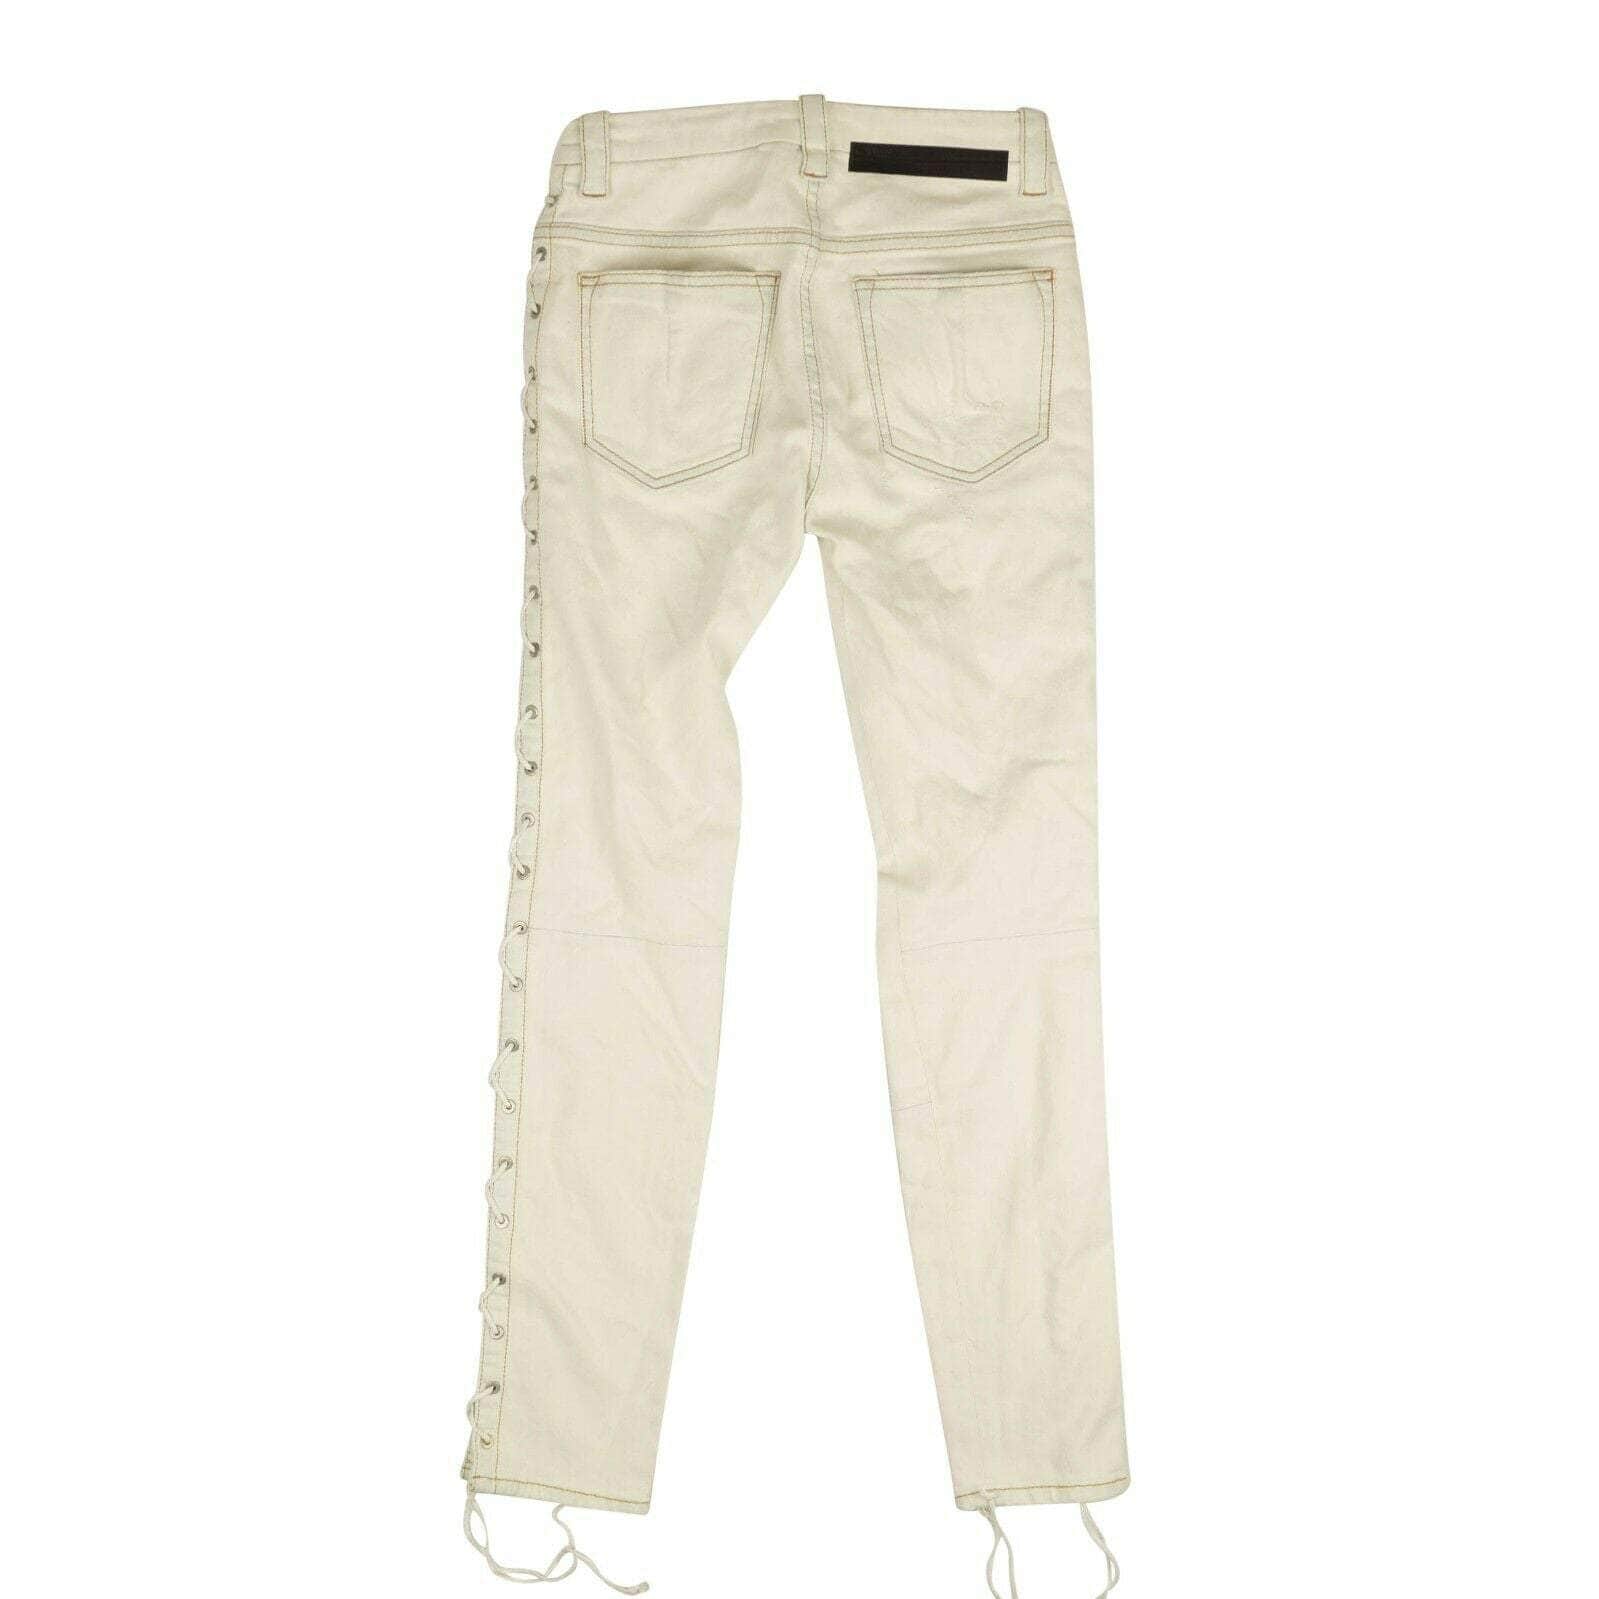 Unravel Project 250-500, channelenable-all, chicmi, couponcollection, gender-womens, main-clothing, size-24, size-25, unravel-project 25 White Washout Denim Side Lace Up Skinny Jeans 74NGG-UN-1204/25 74NGG-UN-1204/25